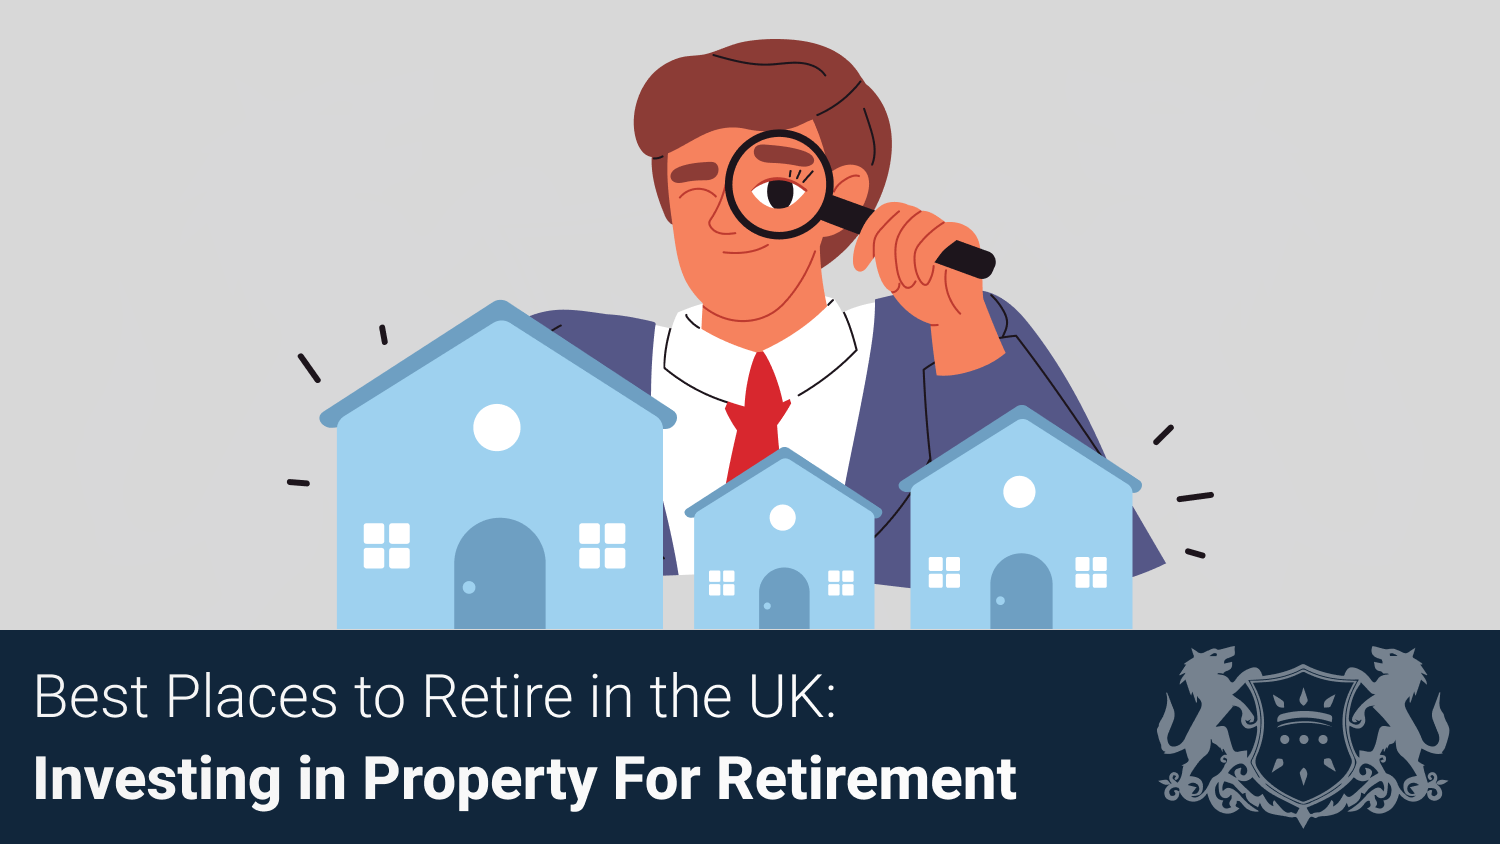 Best Places to Retire in the UK: Investing in Property For Retirement